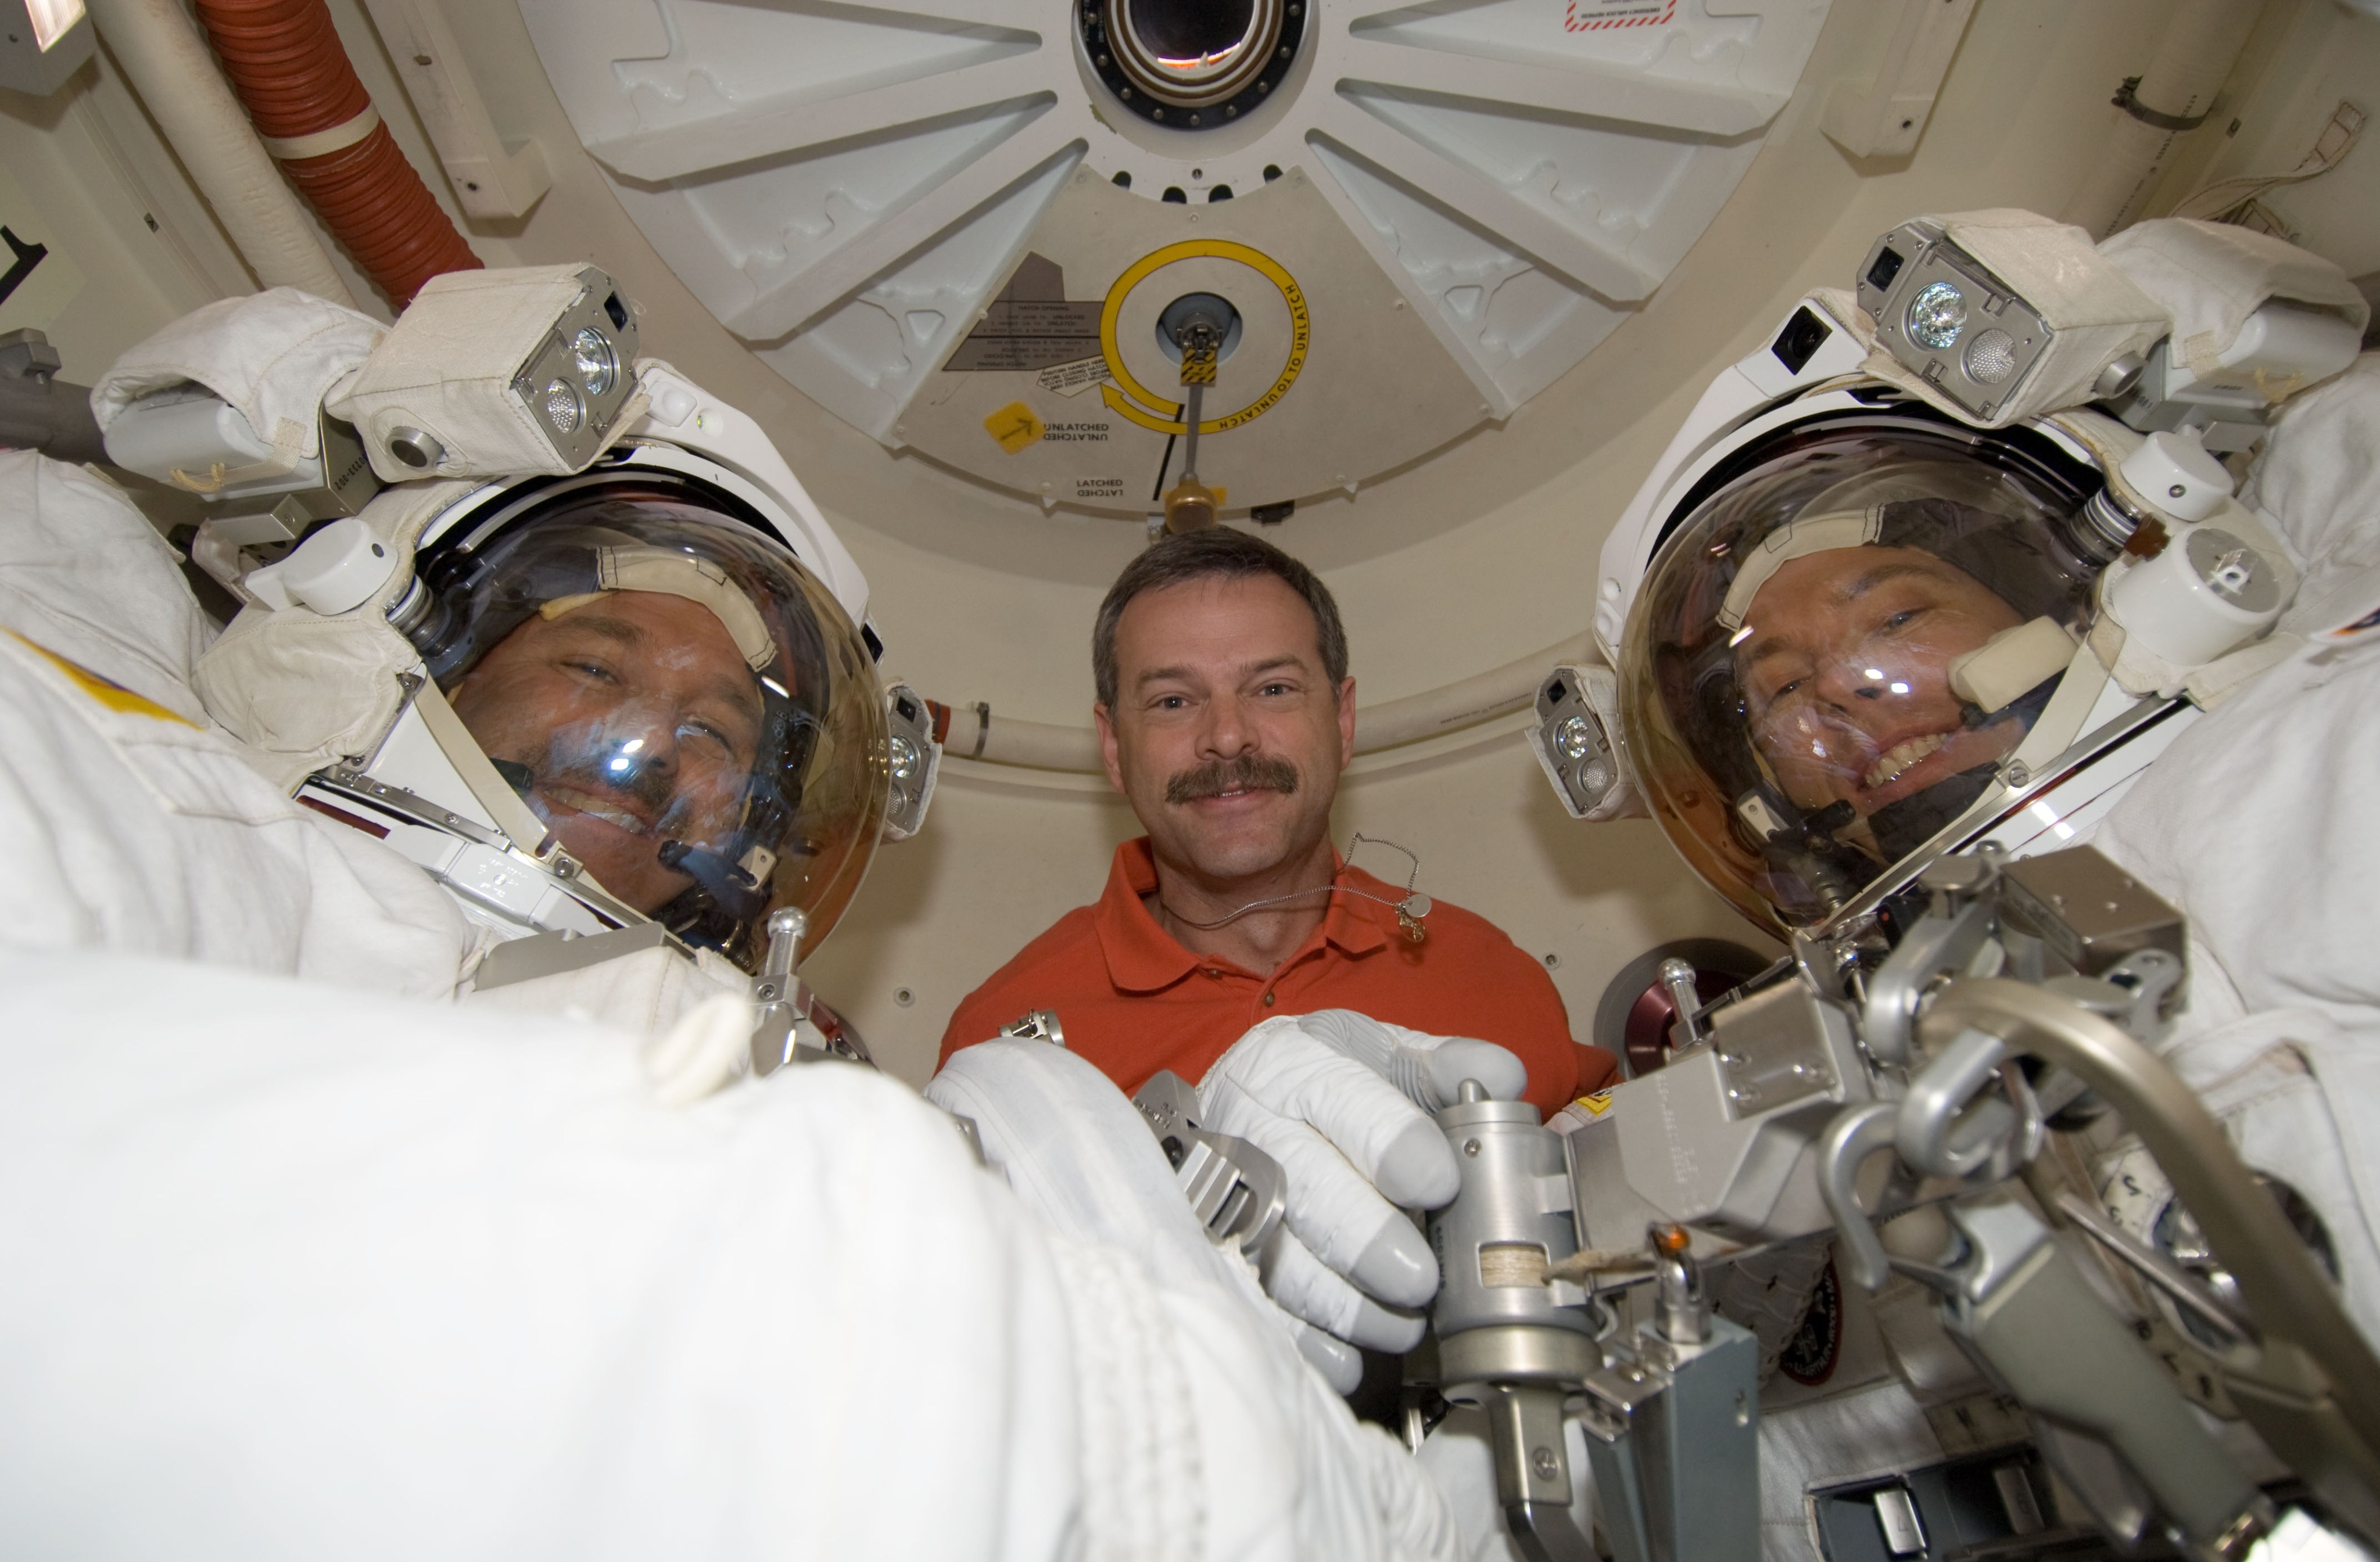 Three people in the airlock, the commander and two astronauts suited up for a spacewalk, pose for a picture.